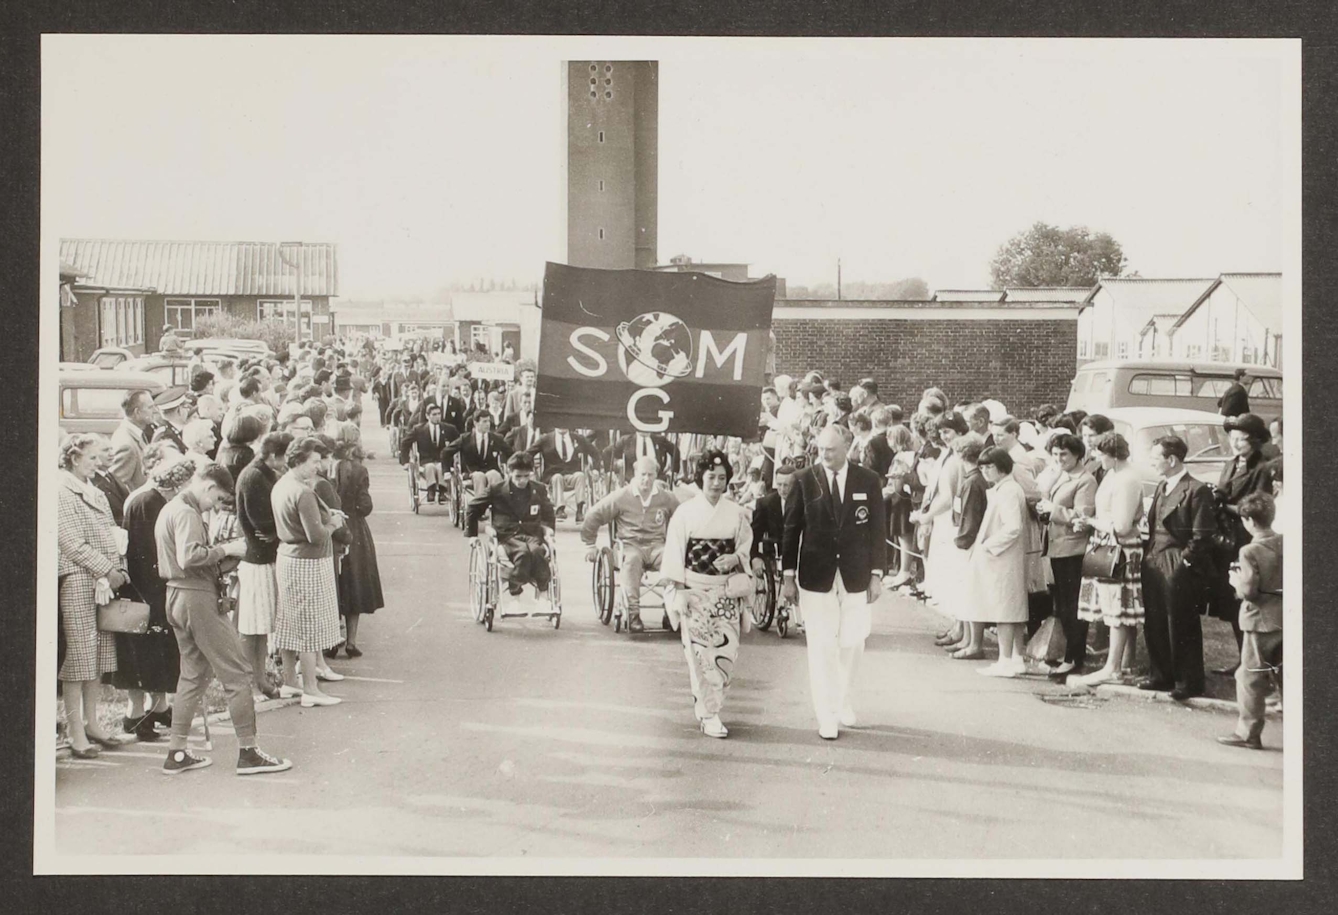 Black and white photographic print of a parade. A woman in a kimono and a man in a dark blazer and white trousers lead the parade, and behind them follow row upon row of people in wheelchairs wearing tracksuits or suits. The front row of people in wheelchairs carries a banner that says SMG with a globe above the letter G. The street is lined with people in 1950s clothing, who watch the parading athletes. One man in the front left of the photograph is wearing a tracksuit and Converse sneakers and is taking photographs.